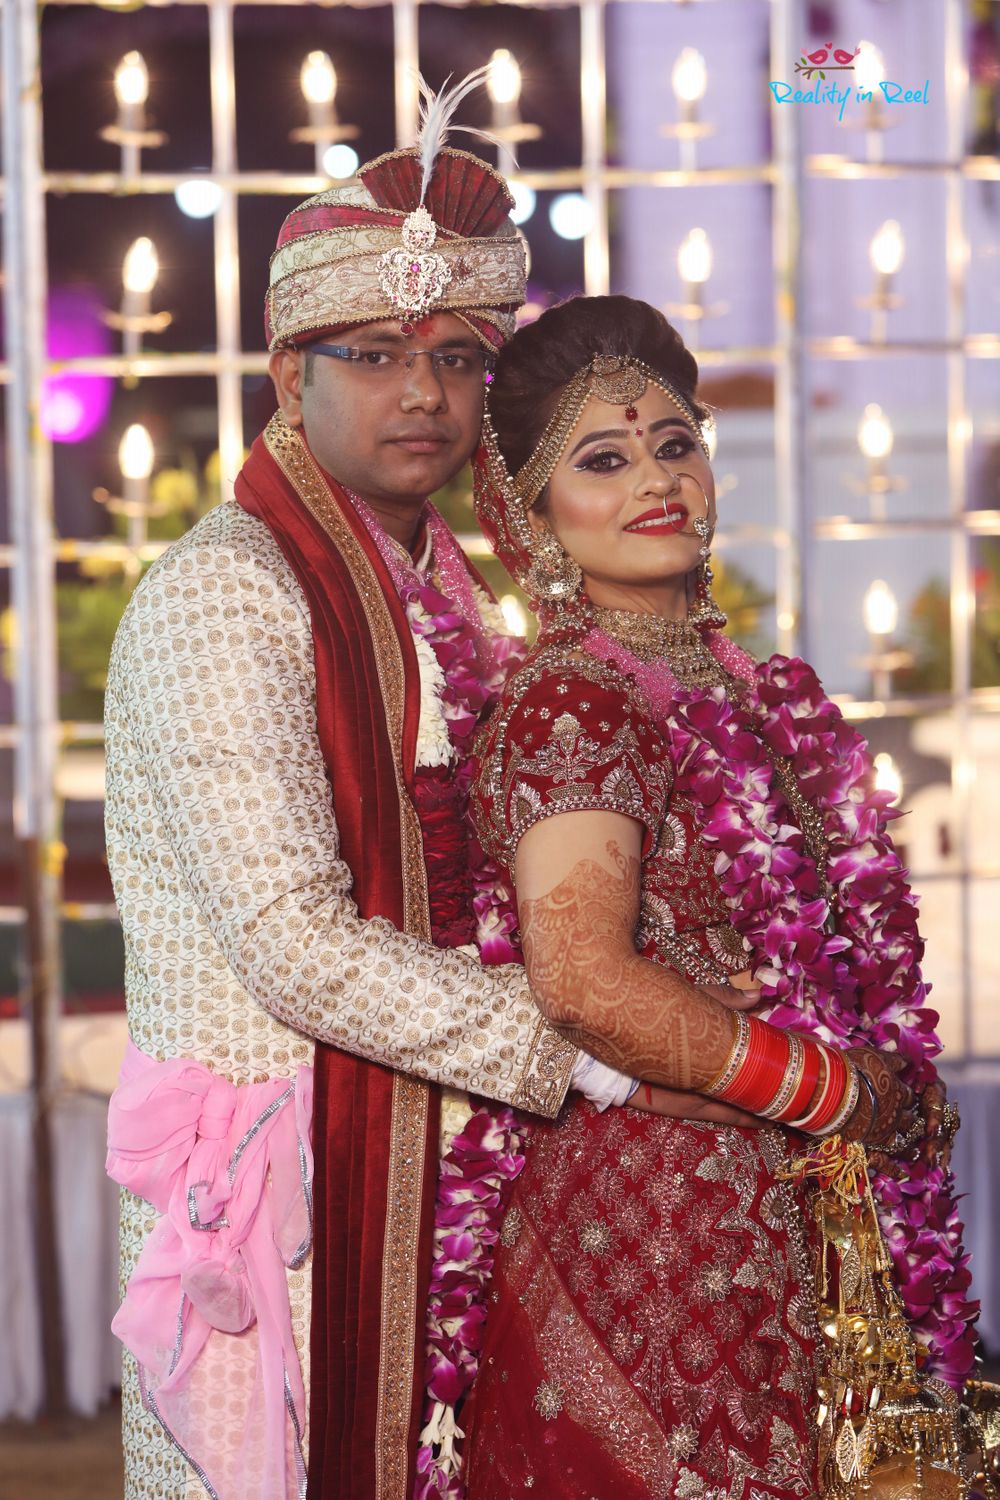 Photo From Himanshi & Gaurav - By Reality in Reel